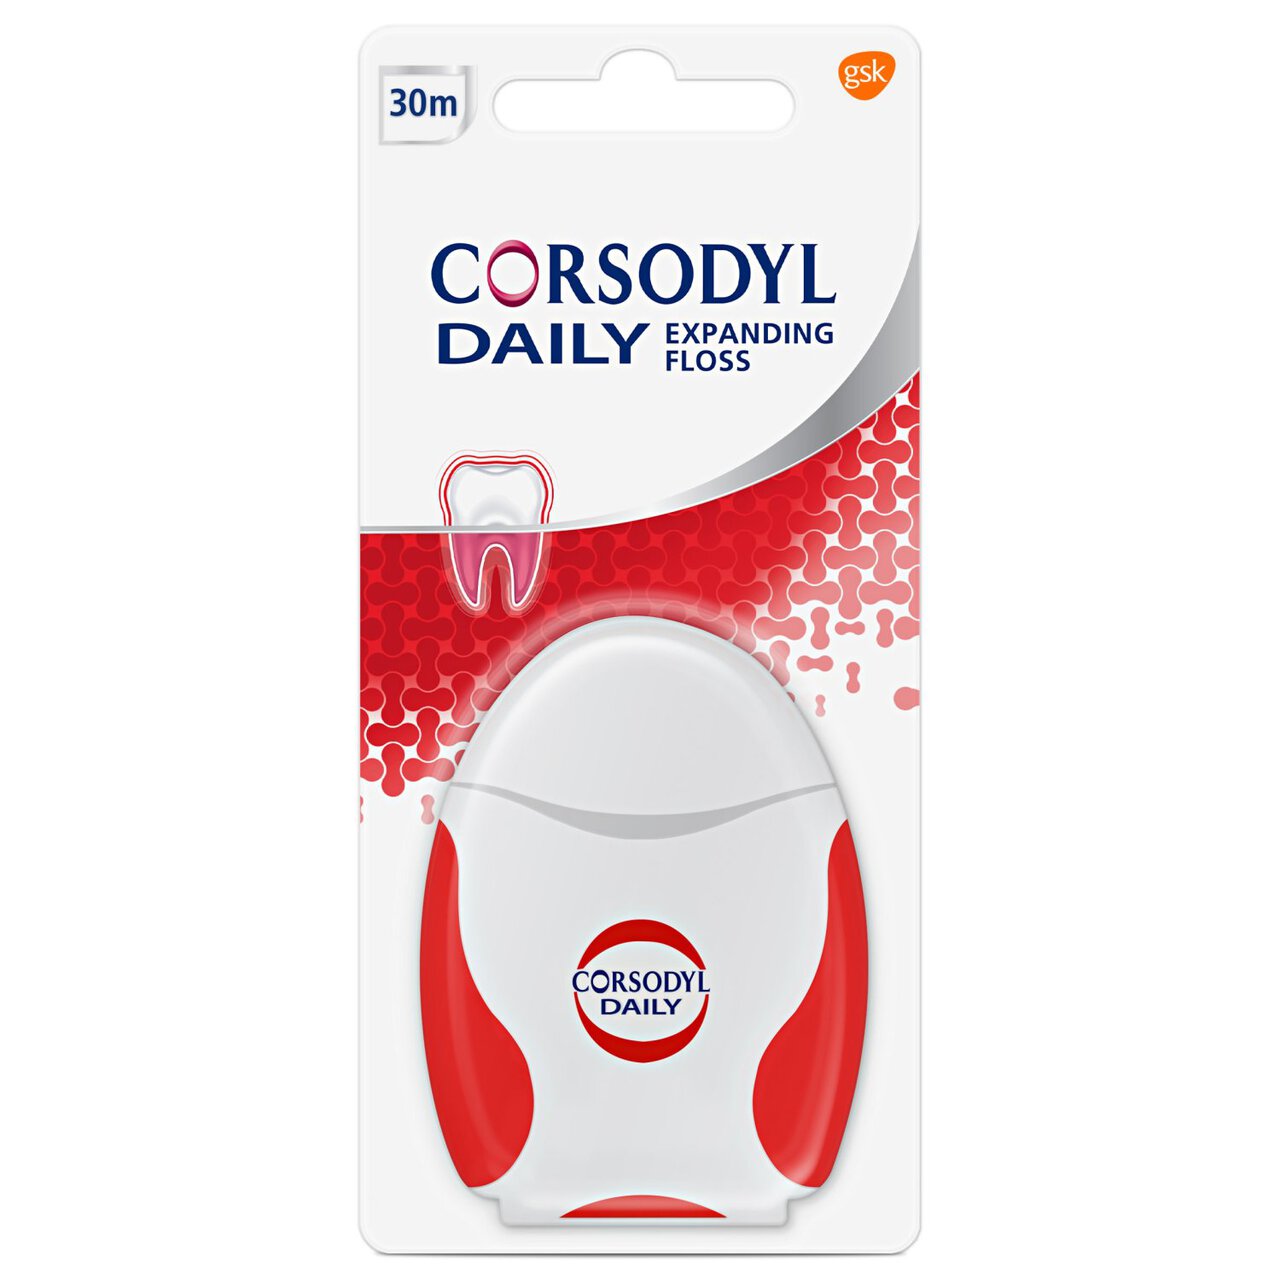 Corsodyl Expanding Floss Daily Plaque Removal For Healthy Gums 30ml 30m